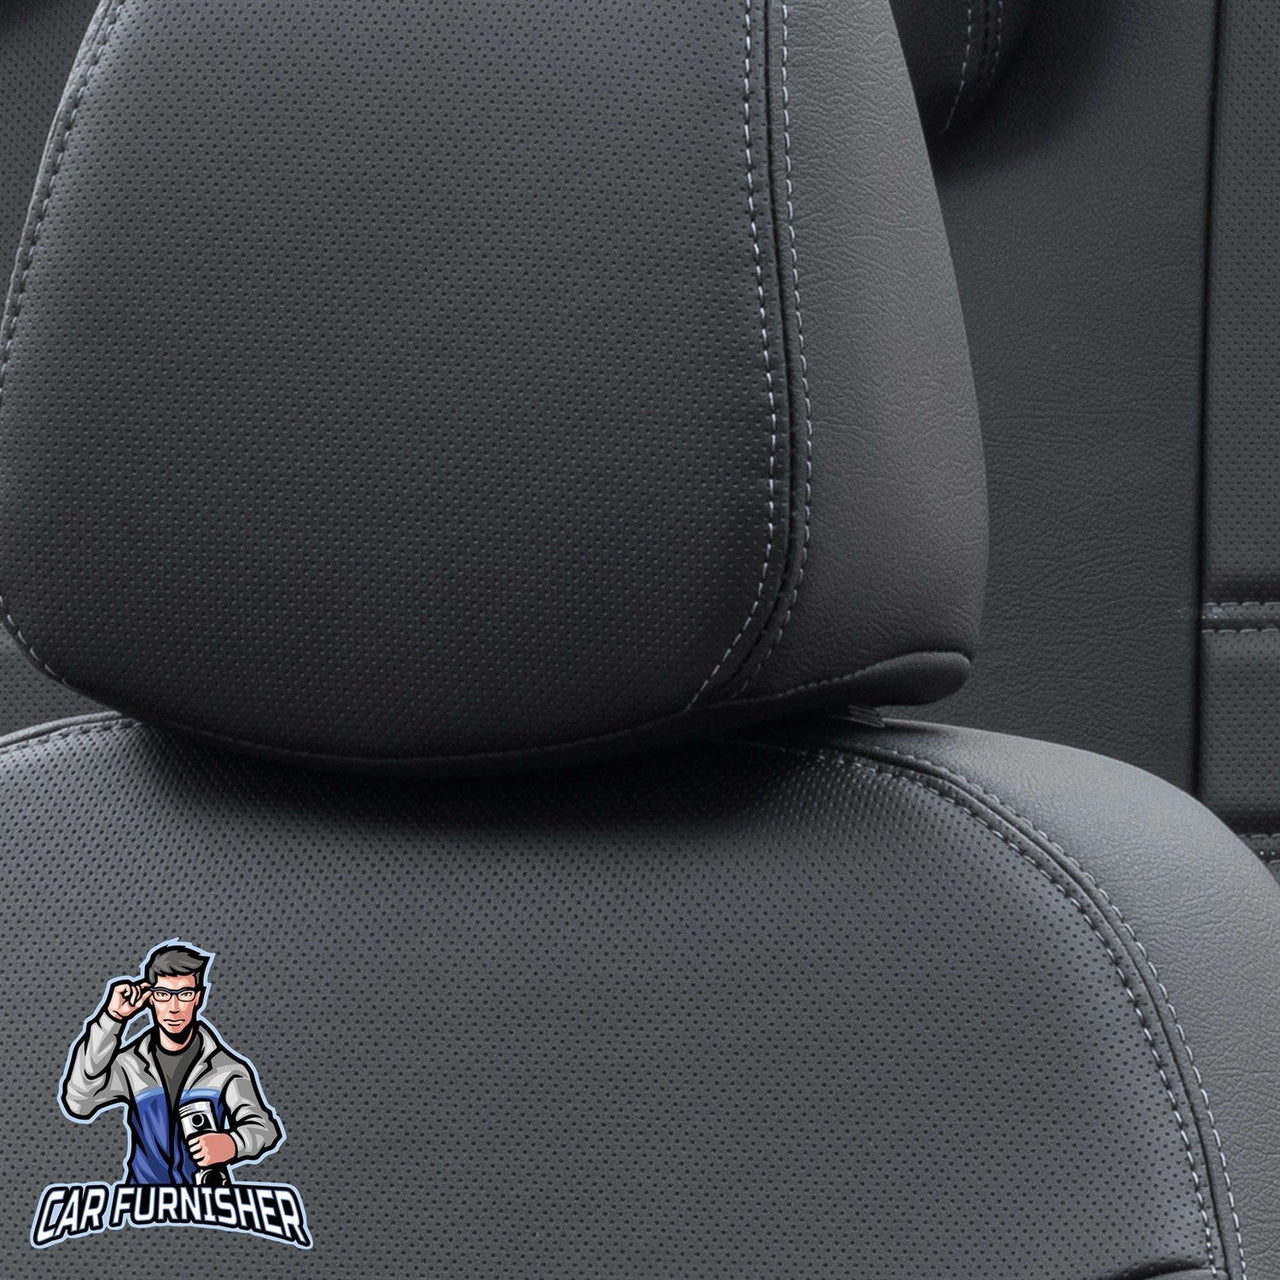 Peugeot 301 Seat Covers Istanbul Leather Design Black Leather